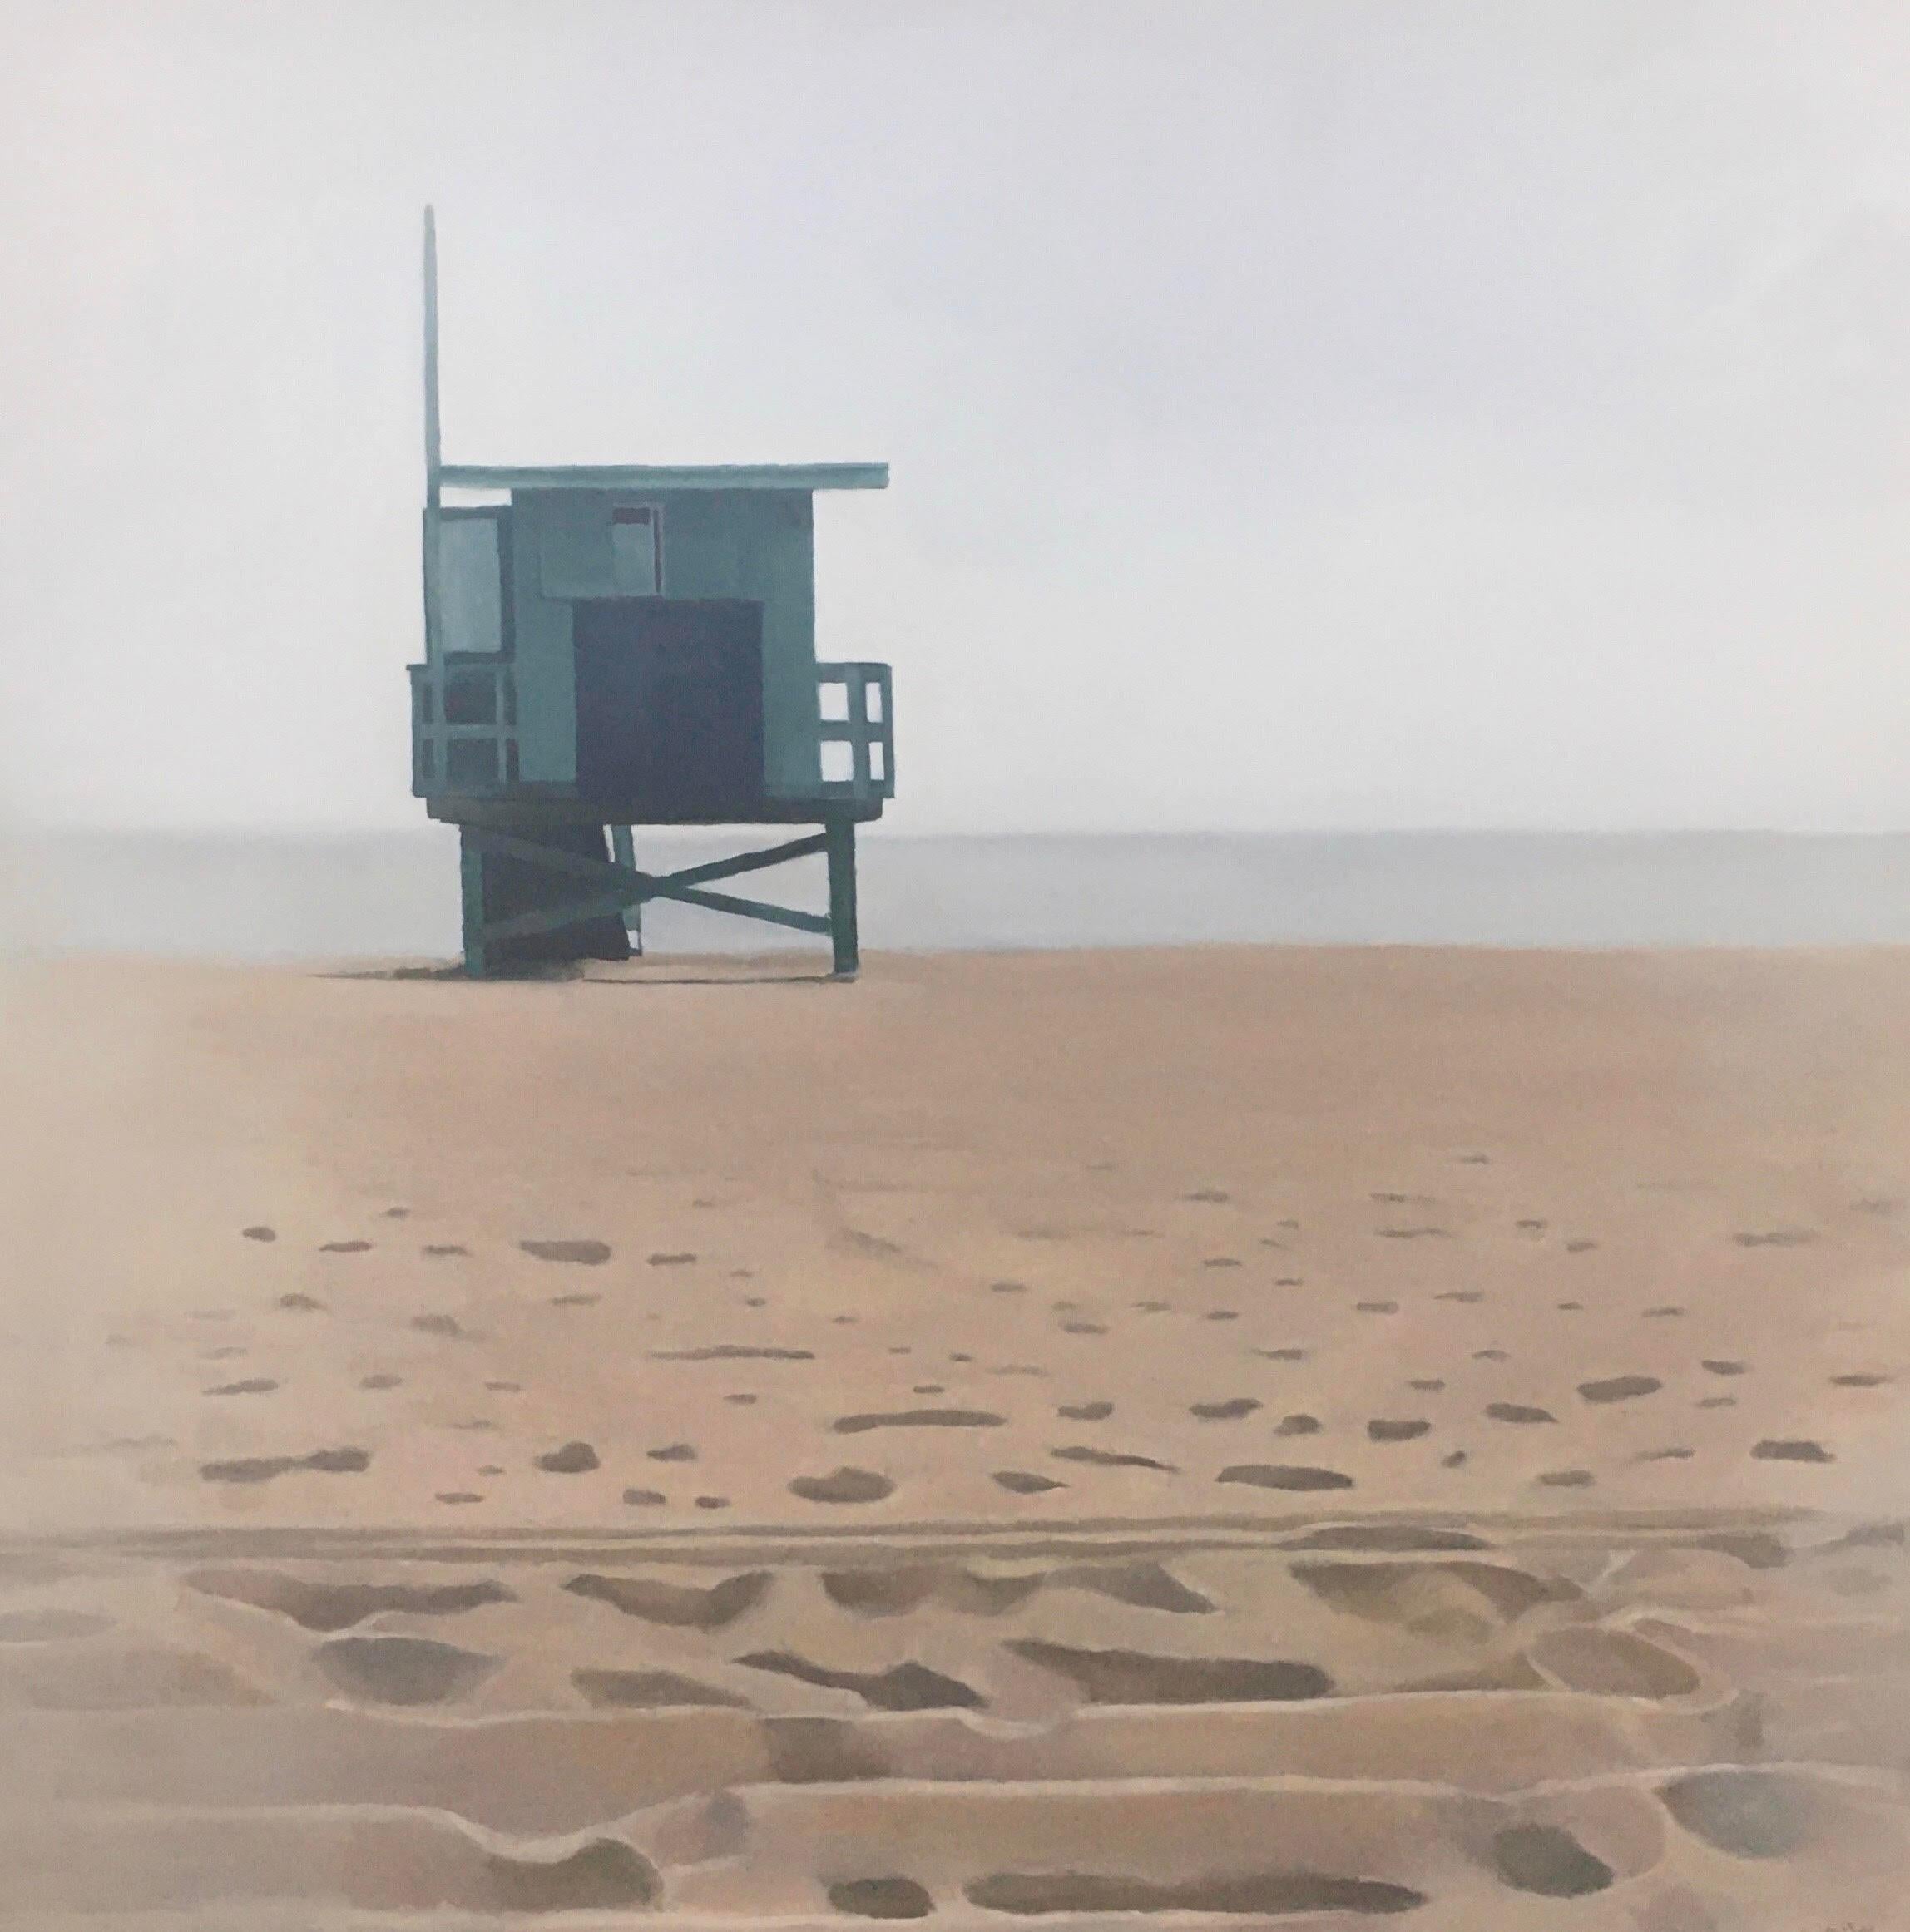 An empty beach on a slightly foggy morning, the only object is a green lifeguard stand above the horizon.  

Stephen was born in Waltham, Massachusetts in 1956. It wasn’t until he was 22 and living in Los Angeles that he began to draw, and soon